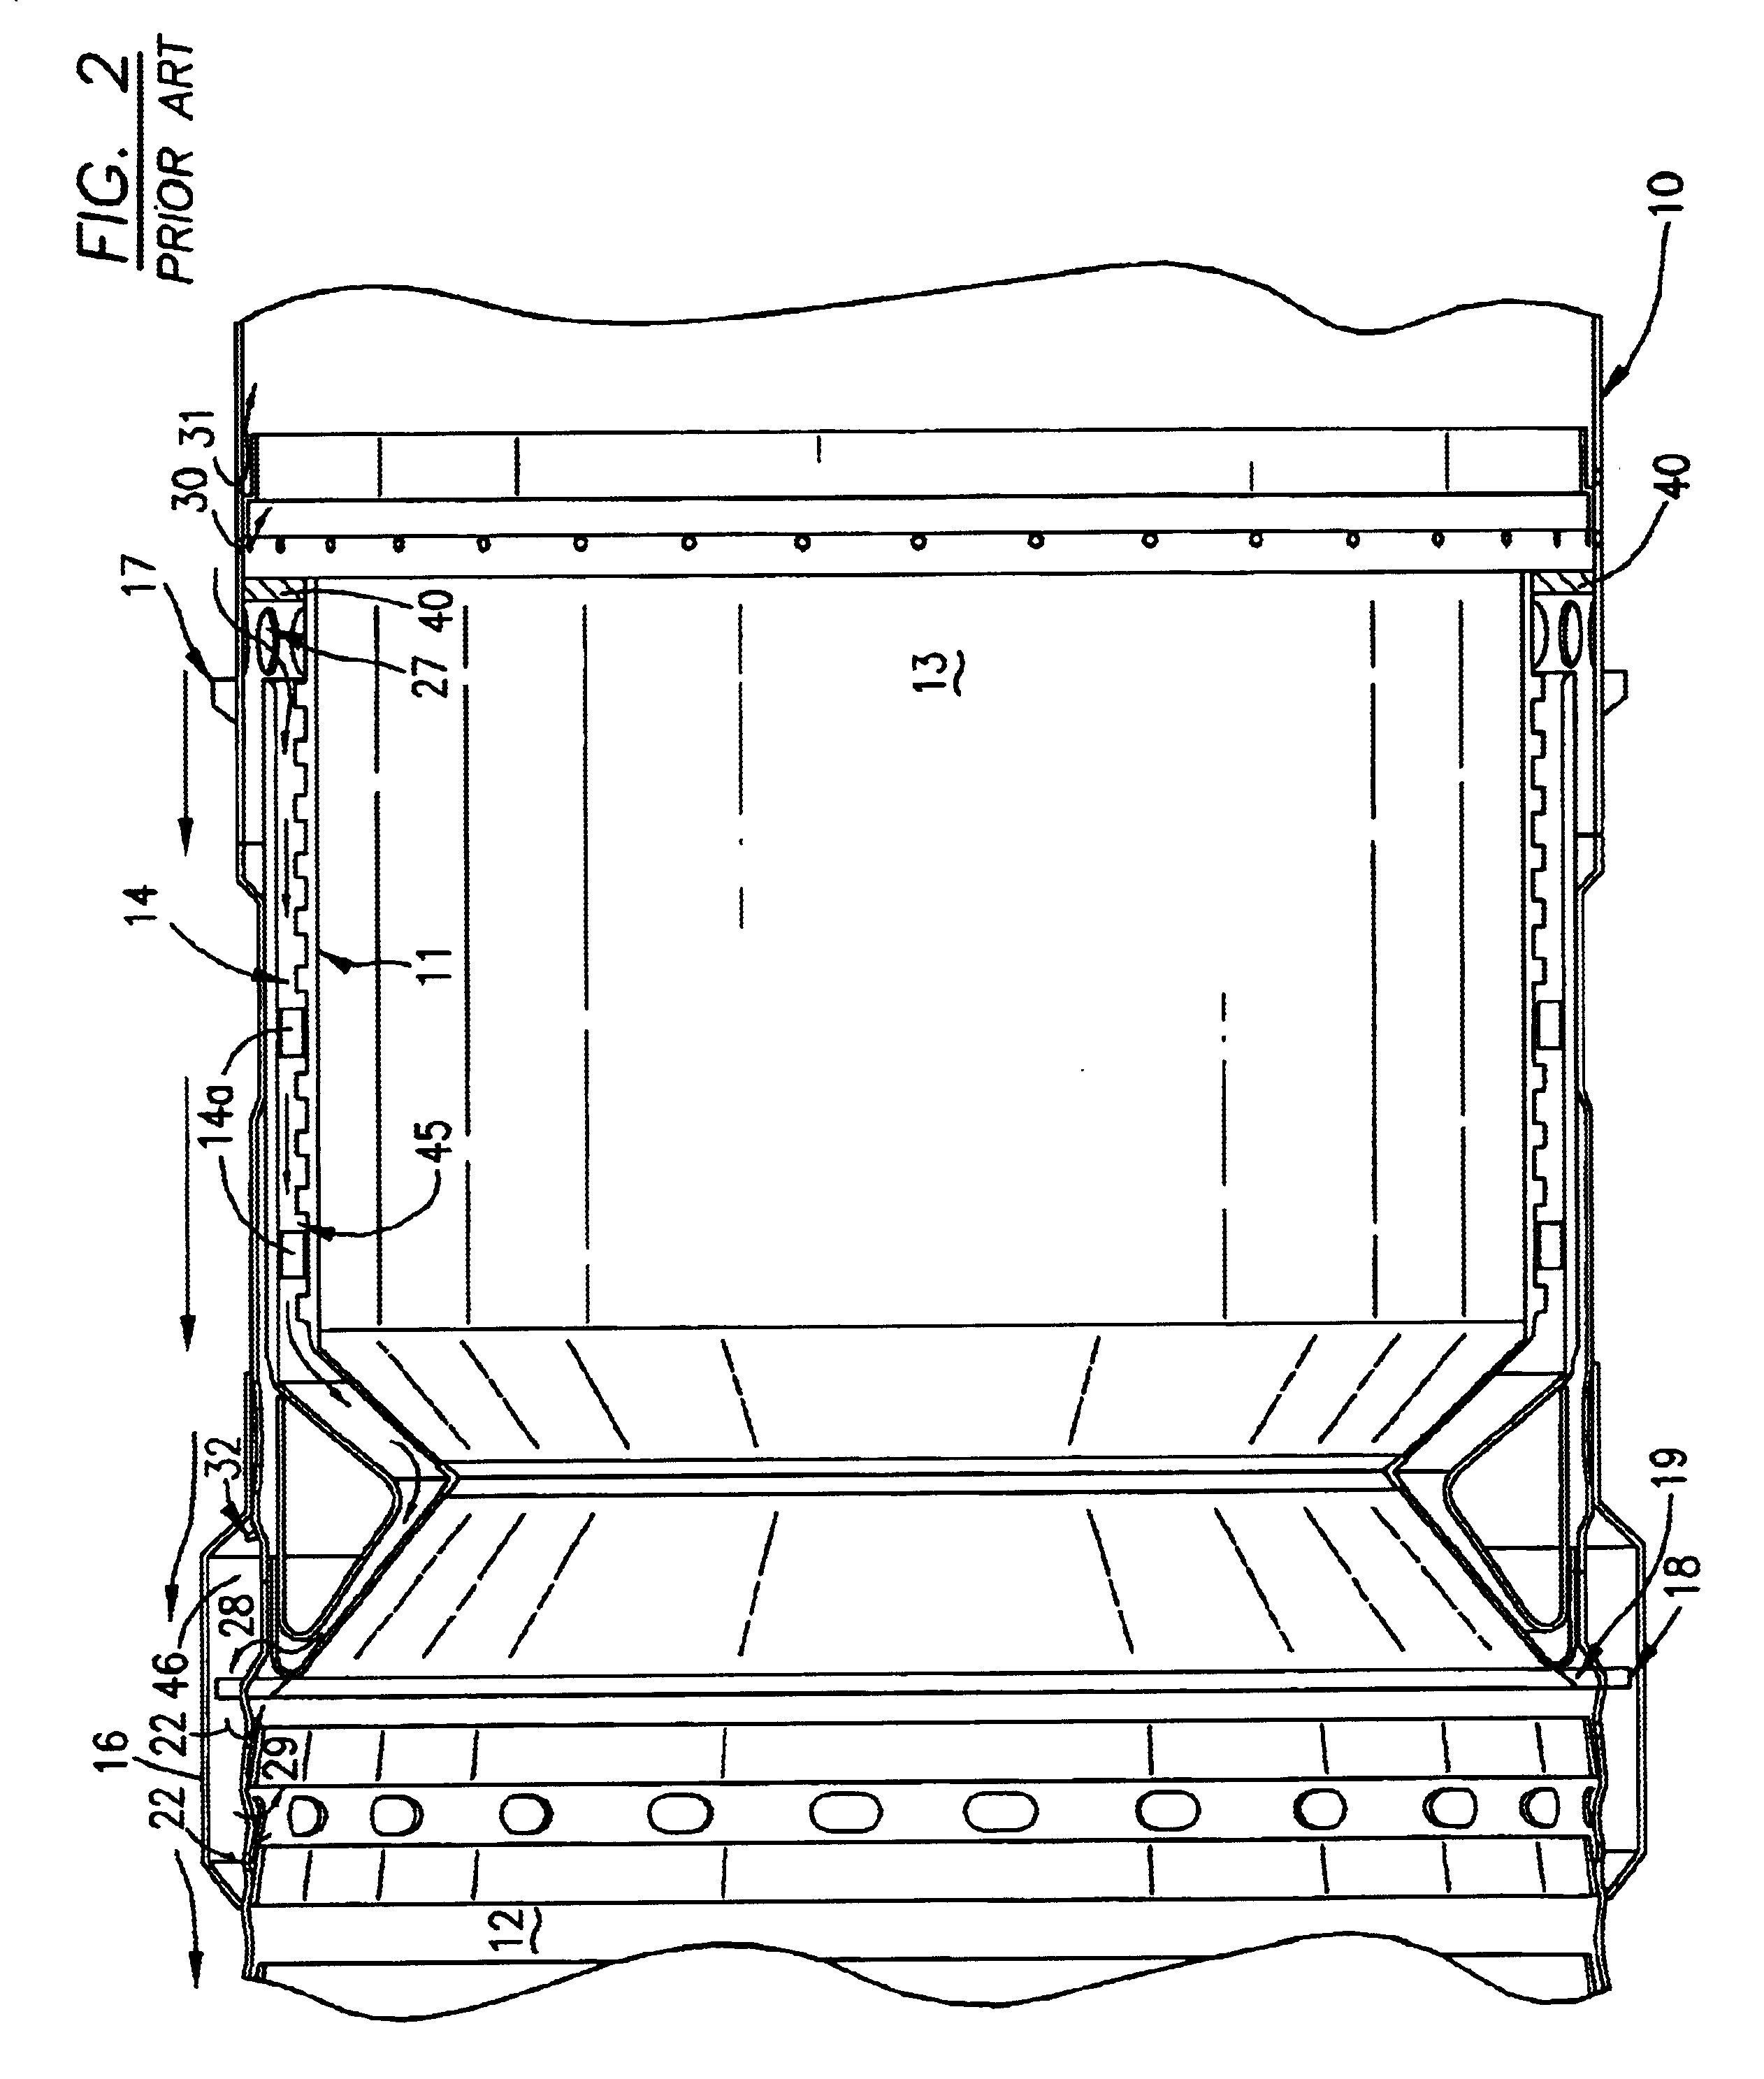 Combustion chamber/venturi configuration and assembly method